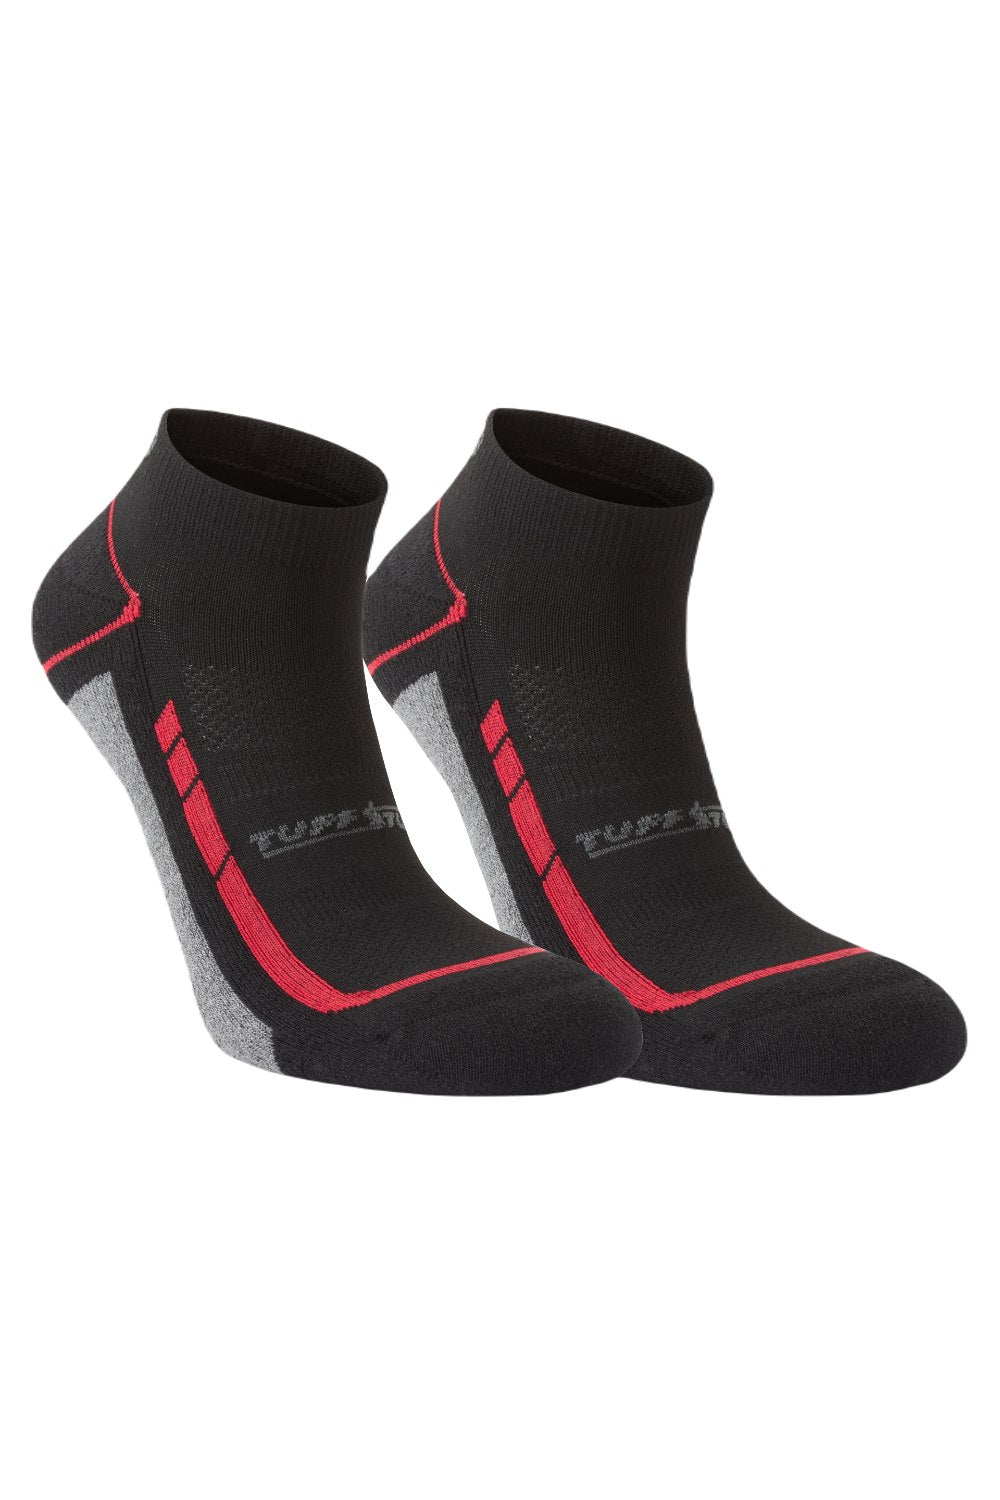 The TuffStuff Elite Low Cut Socks in Black and Red 